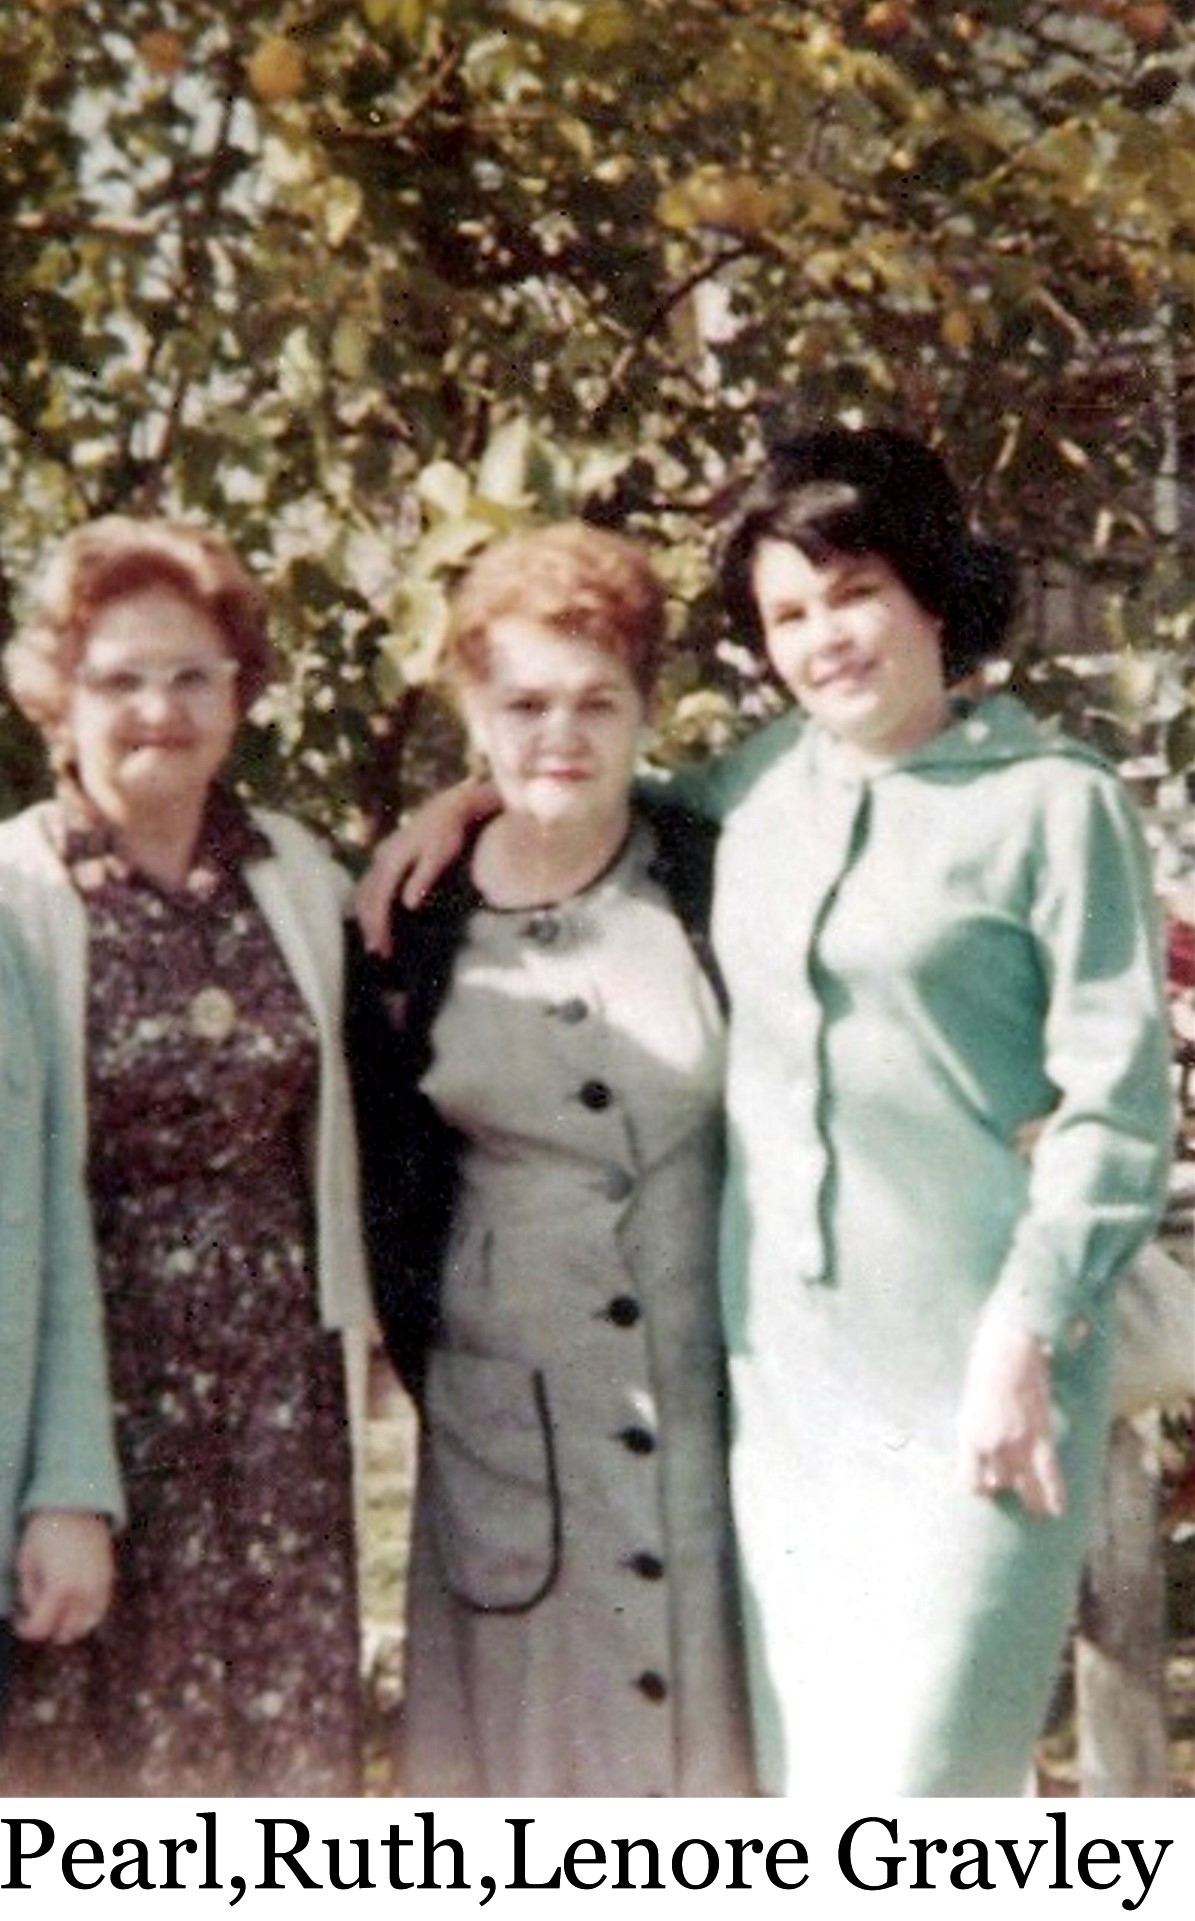 Pearl, Ruth, and Lenore Gravley